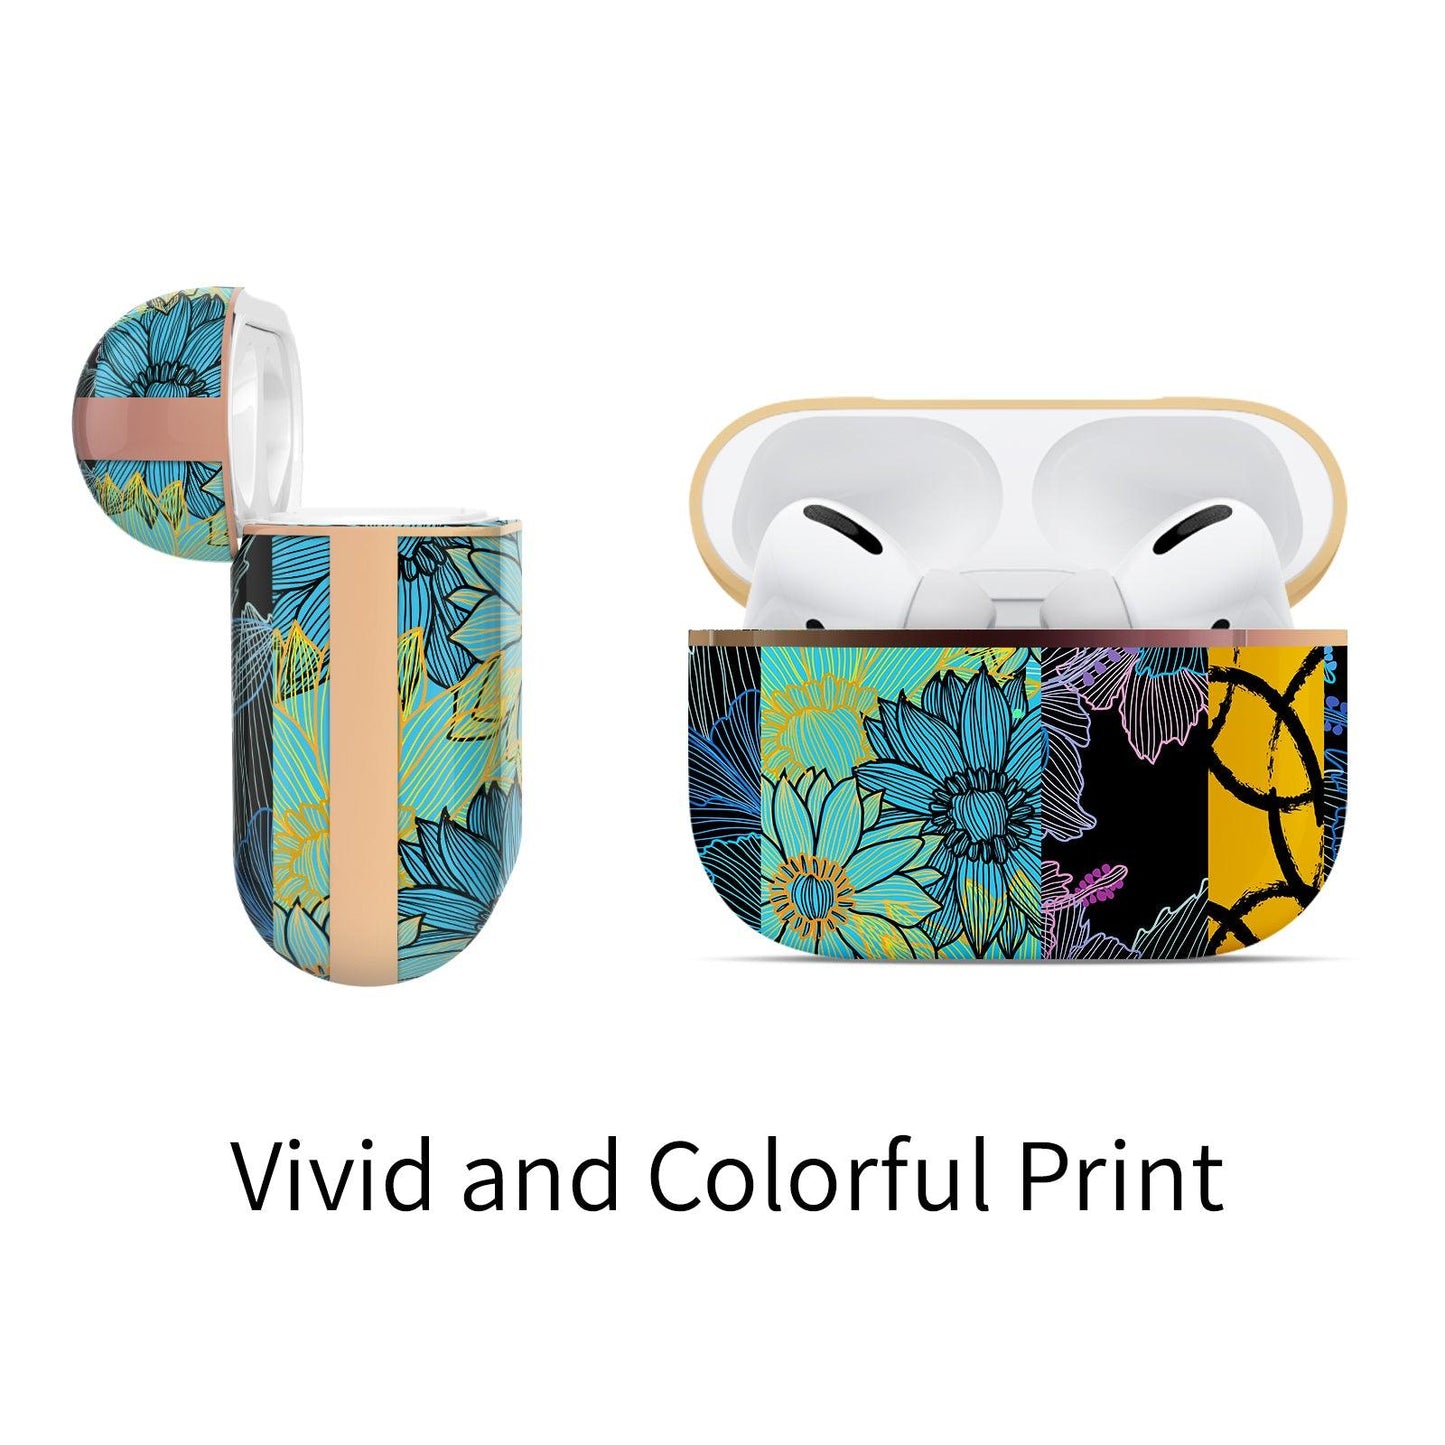 AirPods Pro 1st Generation Contemporary Cover, Hibiscus and Sunflower - Berkin Arts